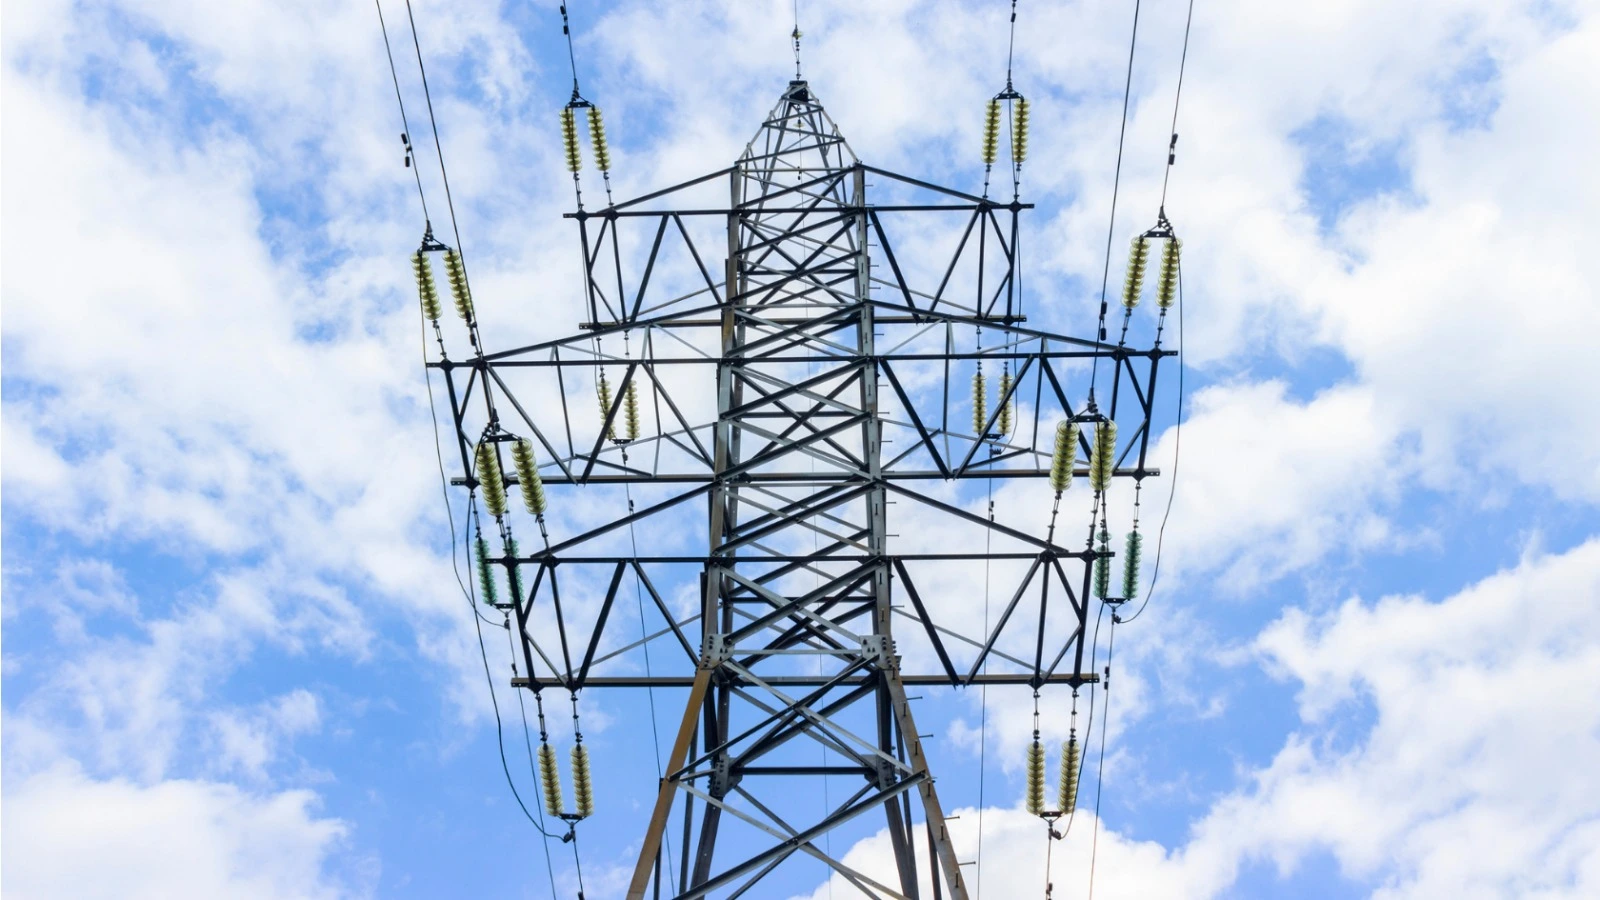 Apraava Energy Secures Transmission Project in Madhya Pradesh